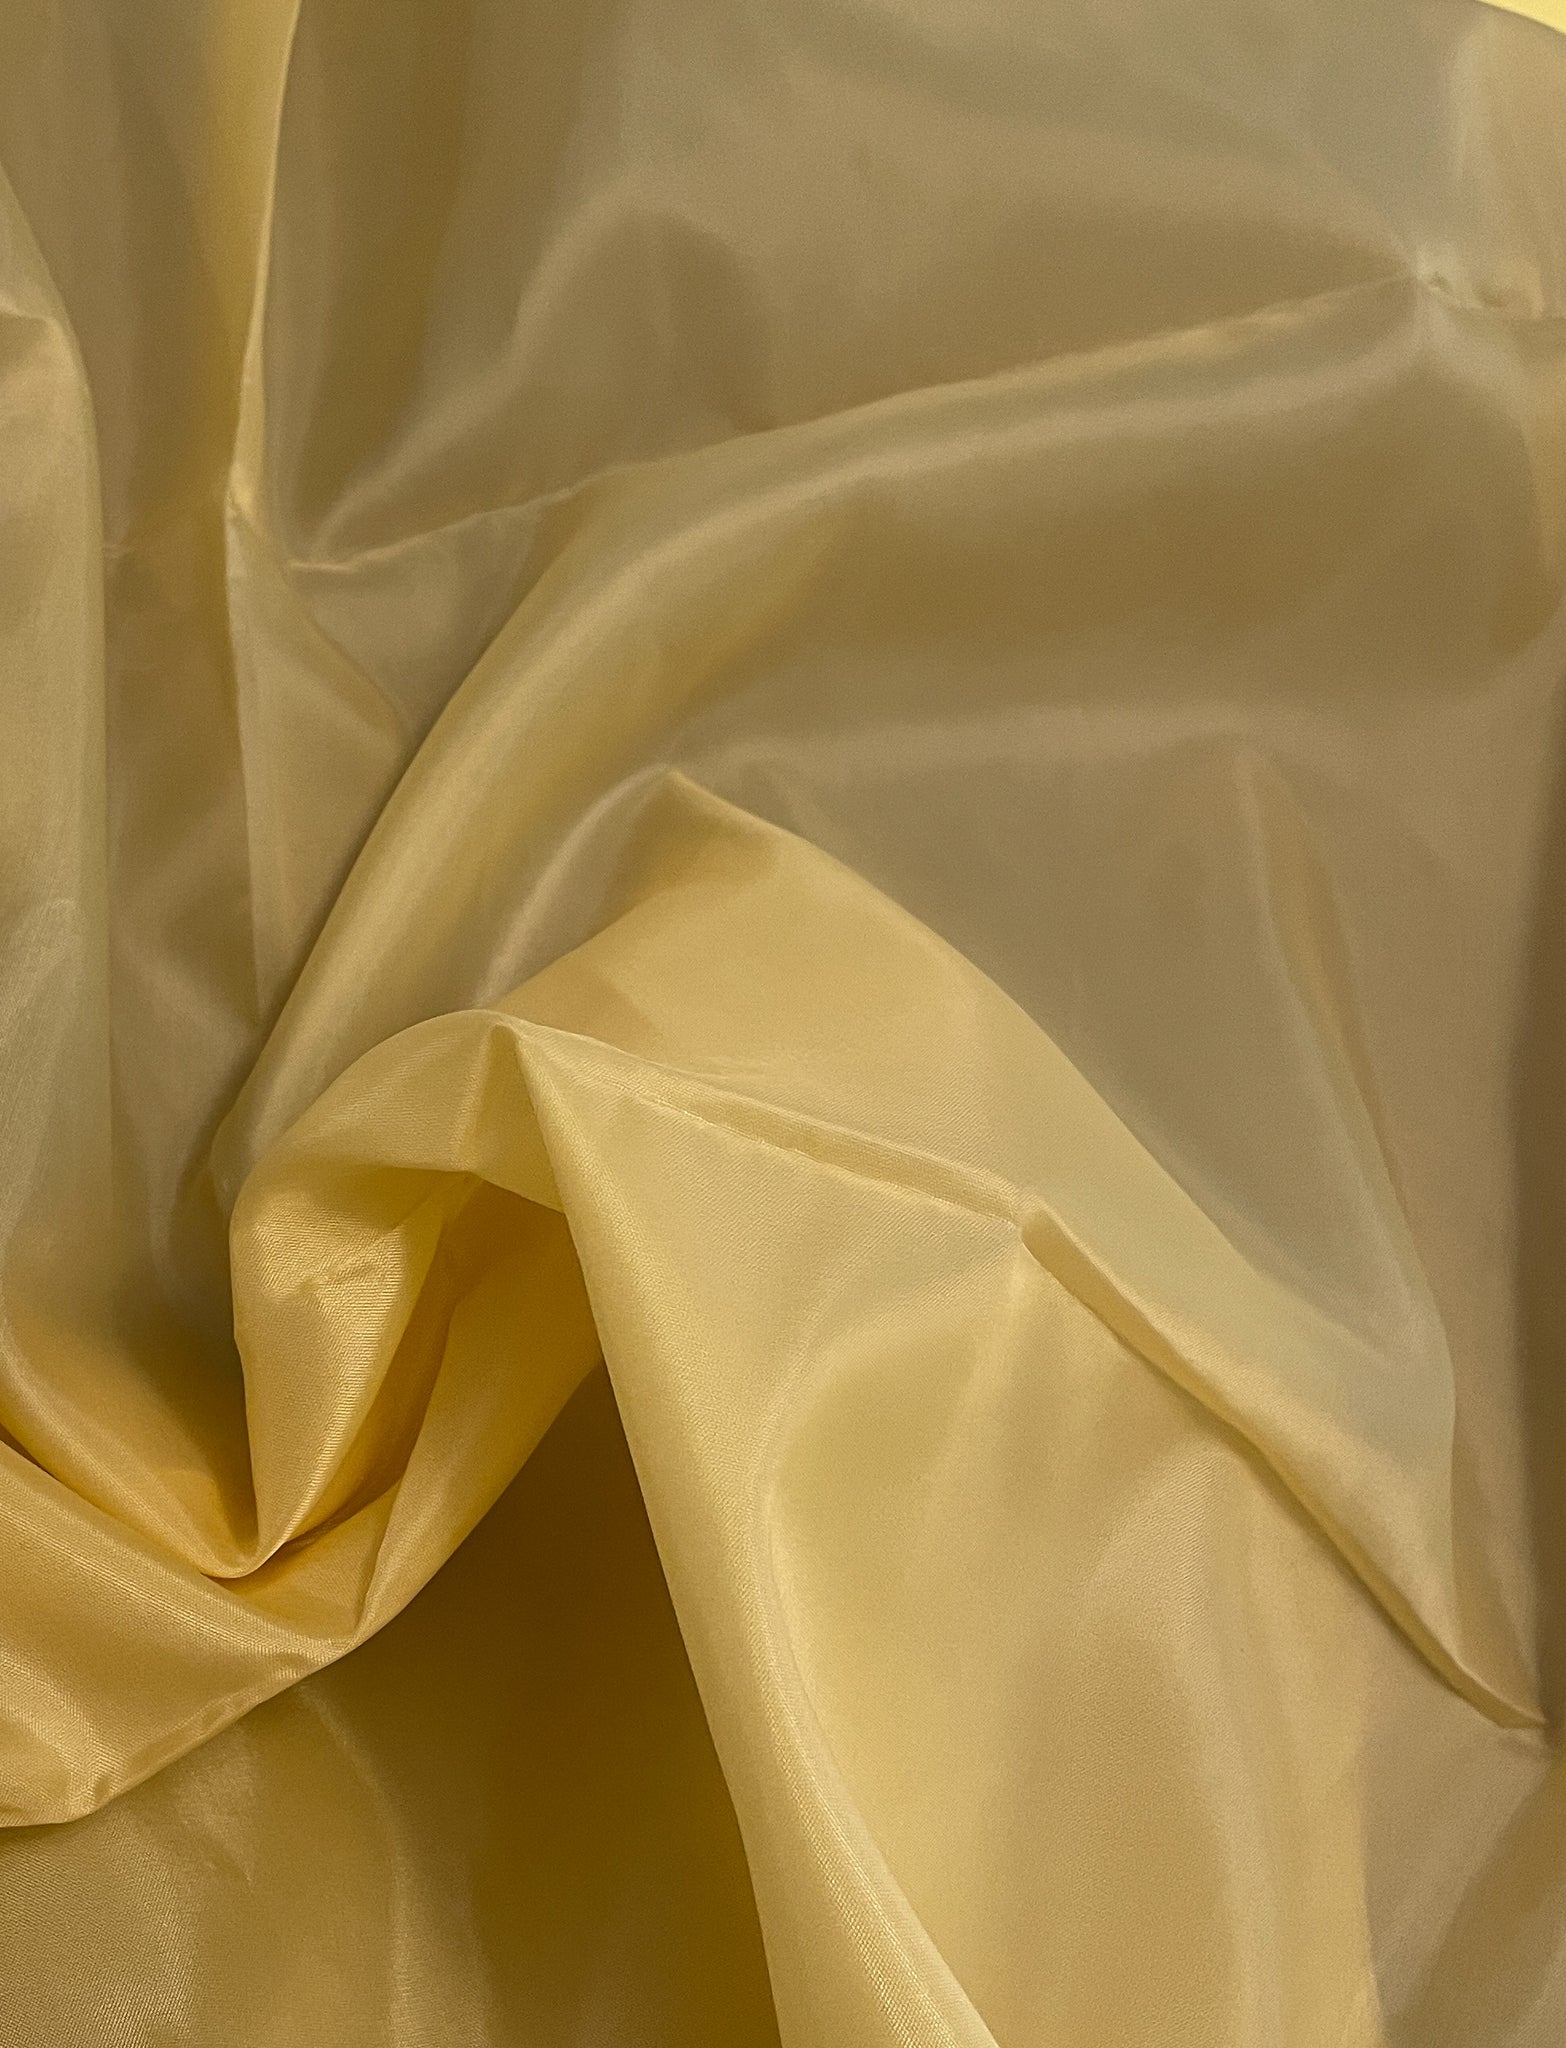 SALE 1 YD Polyester Lining - Dull Yellow